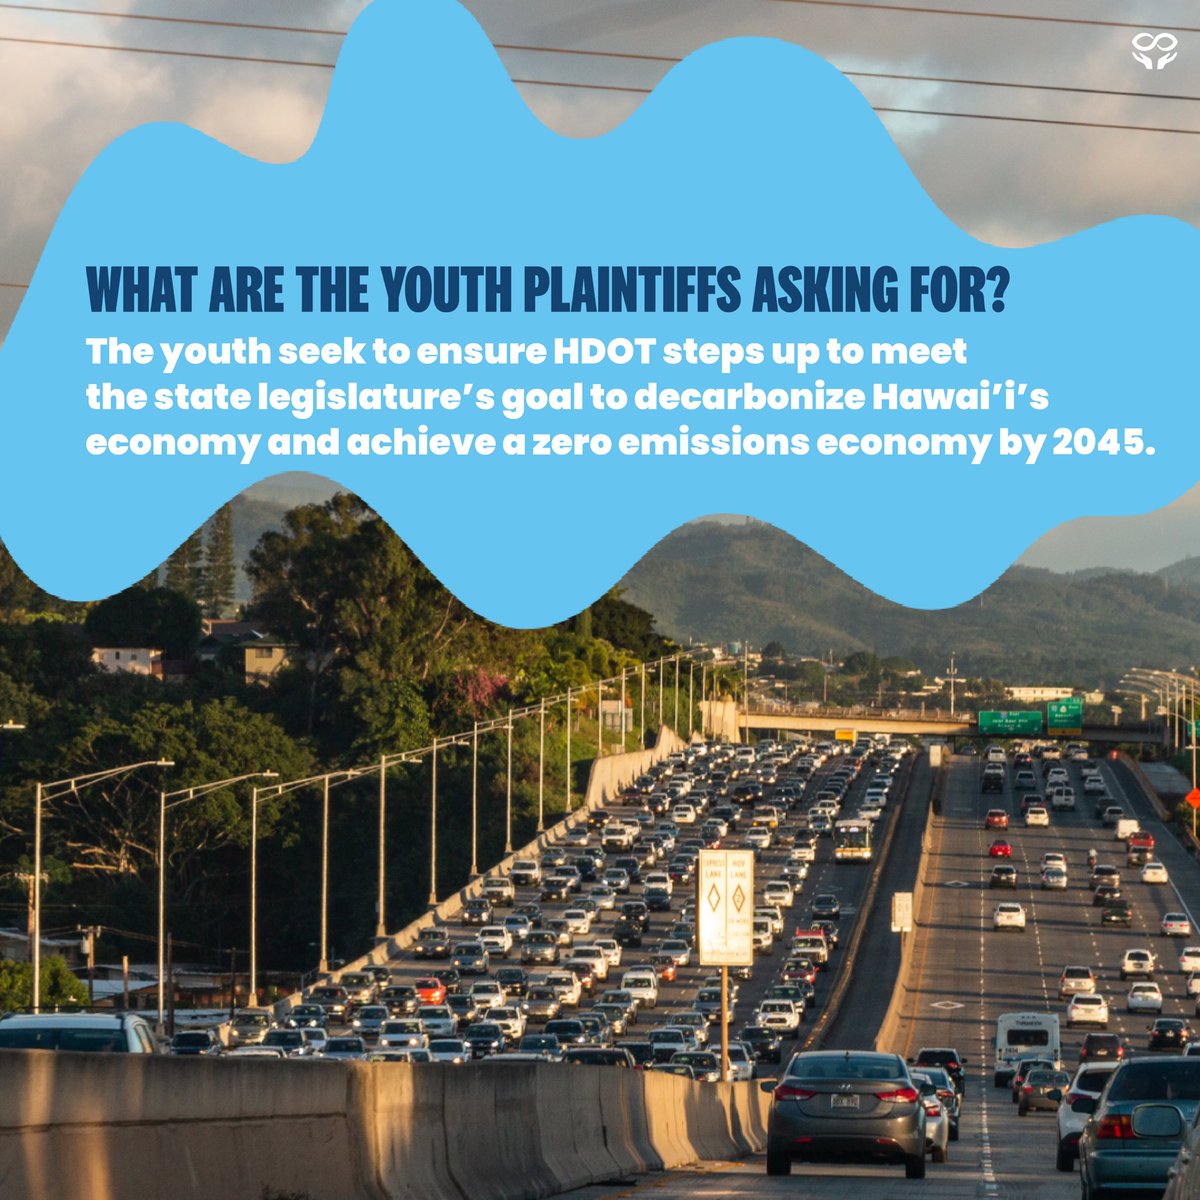 Charlotte decided to join the lawsuit because she wants to do everything she can to help mitigate climate change and ensure future generations lead happier and healthier lives. Stay up to date on this groundbreaking youth-led lawsuit: youthvgov.org/join #YouthvGov